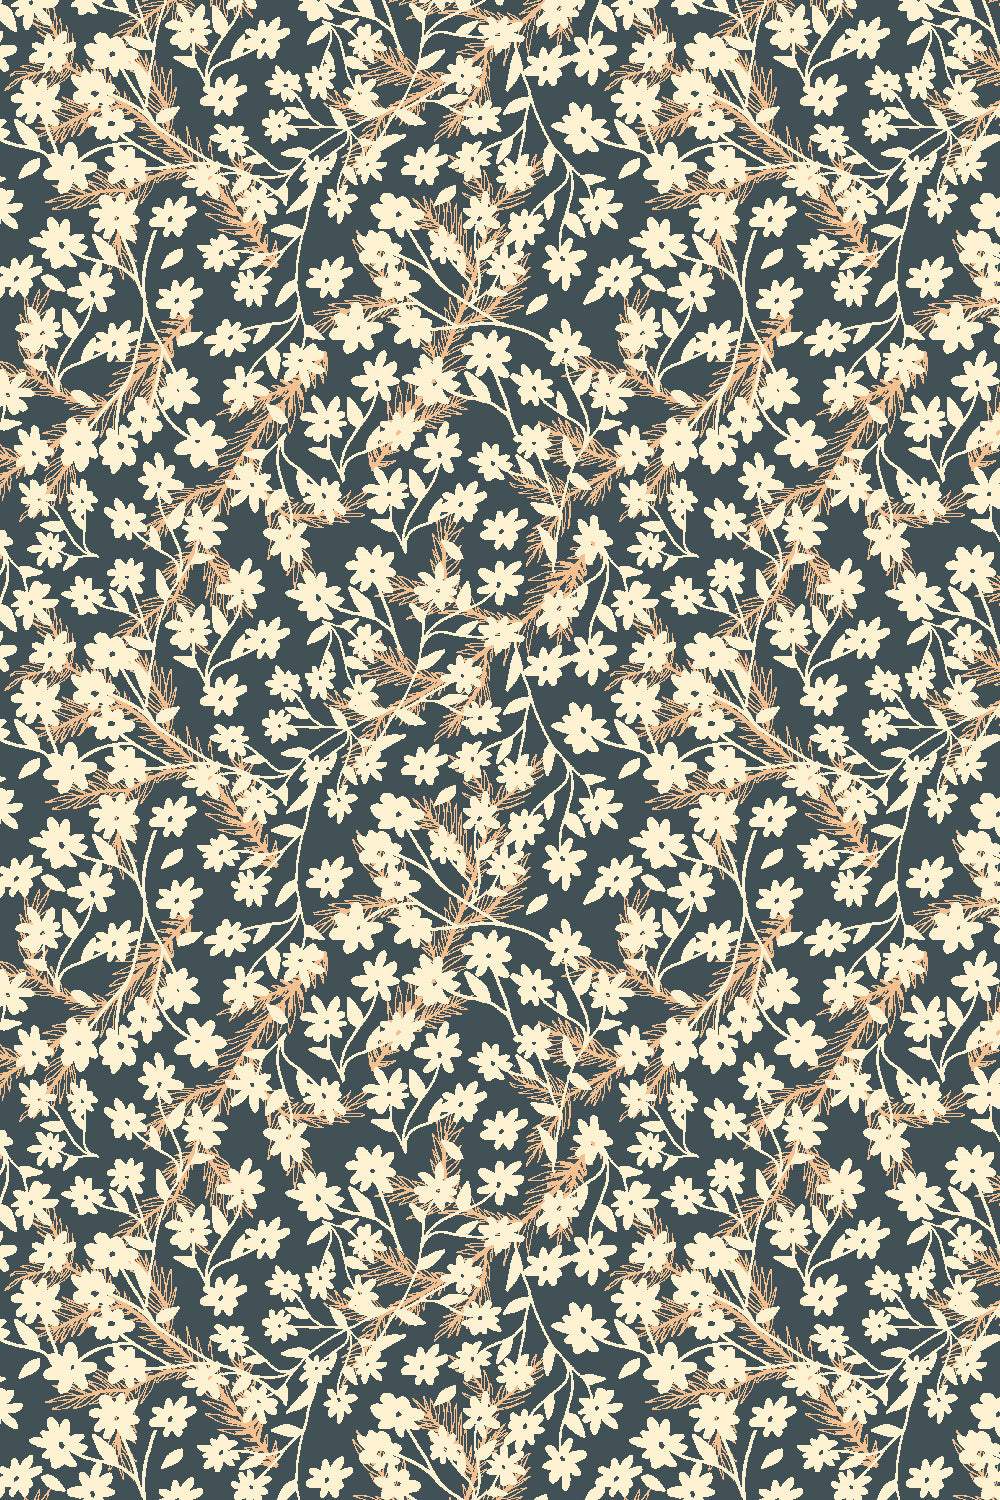 Twin Hills Redwood Flower By Ash Cascade For Cotton + Steel Fabrics Bay